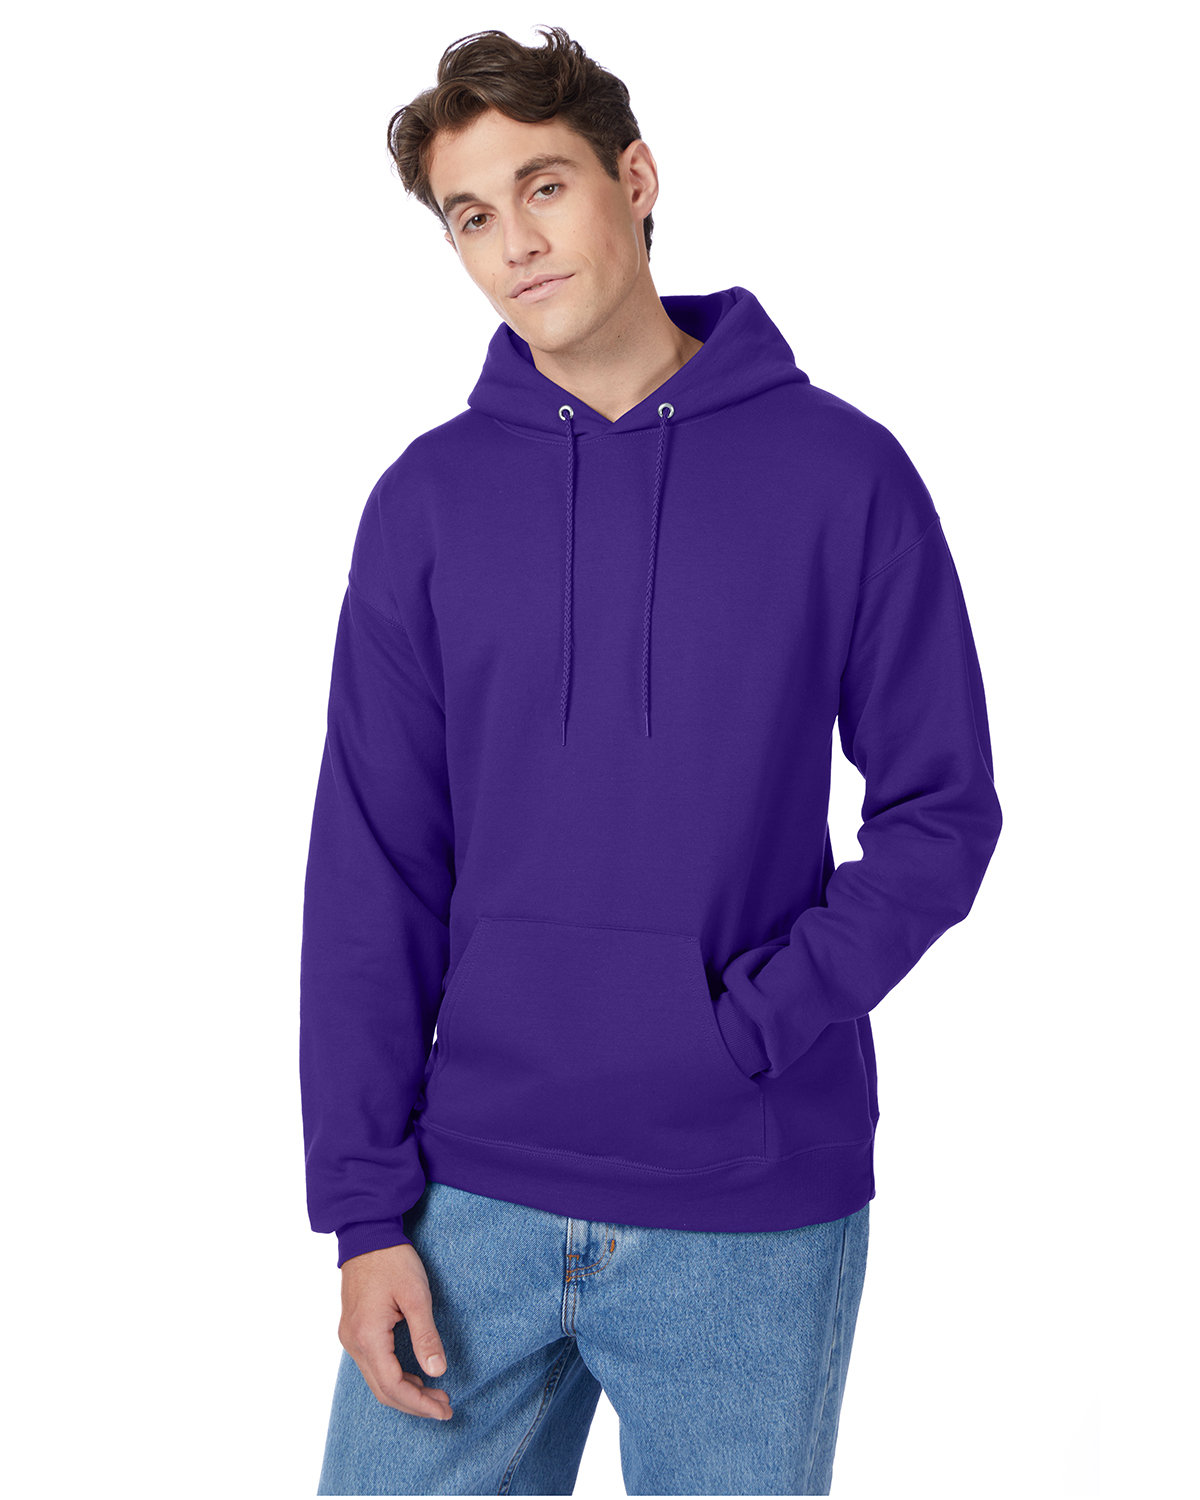 Hanes Comfortblend P170 Size Chart, Hanes P170 Pullover Hoodie Sweatshirt  Size Guide, Hanes P 170 Black Mockup and Size Table -  Canada